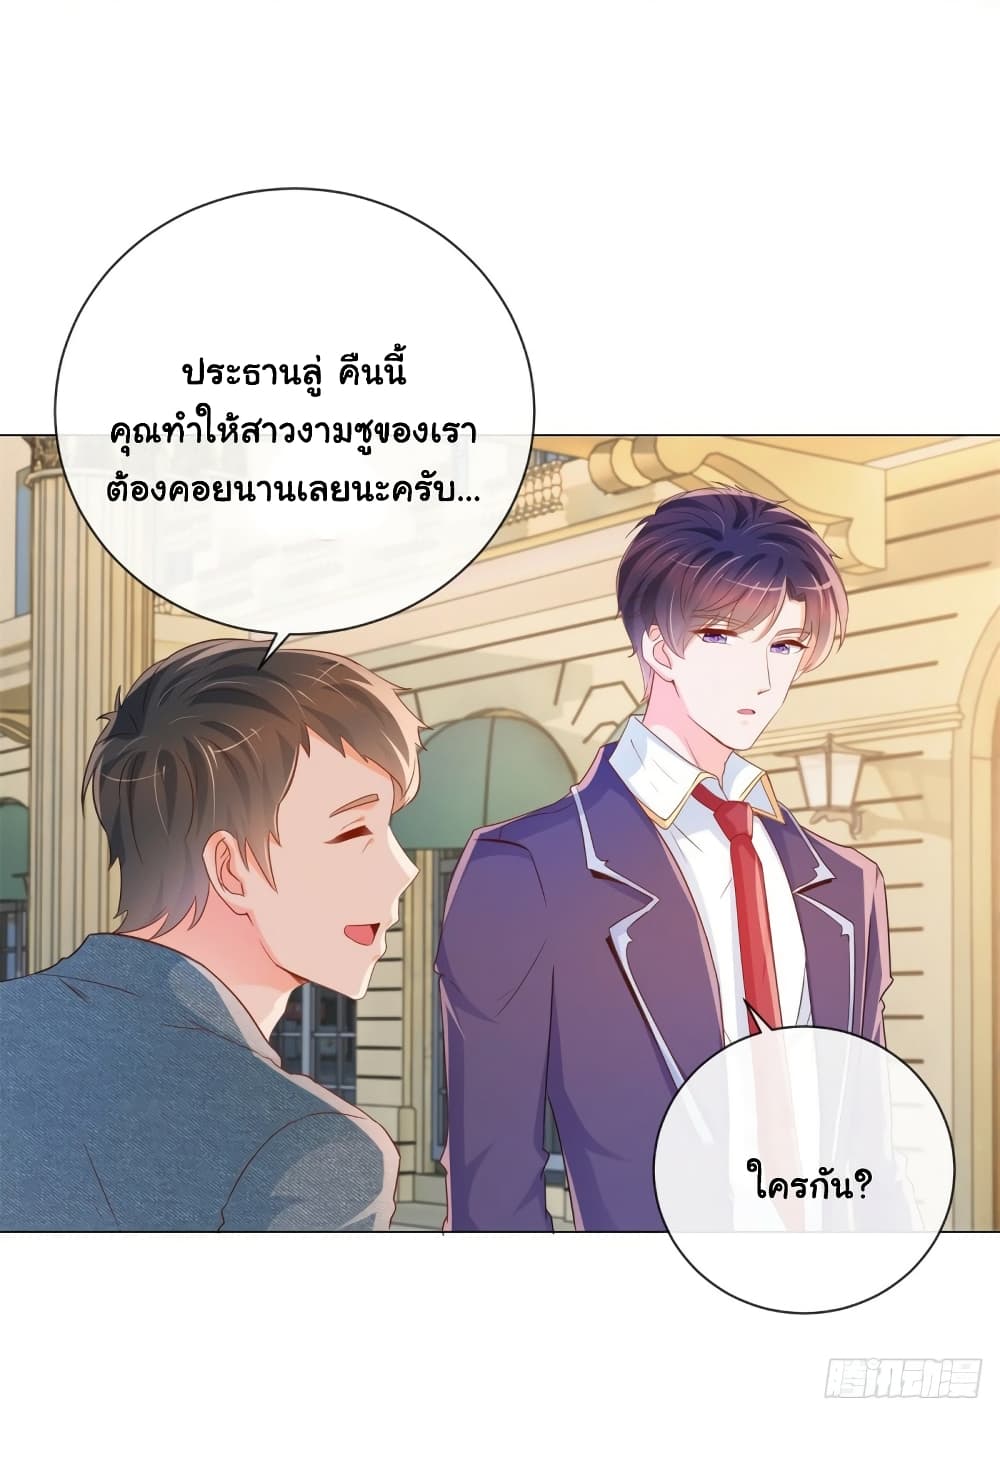 The Lovely Wife And Strange Marriage à¹à¸œà¸™à¸£à¸±à¸à¸¥à¸§à¸‡à¹ƒà¸ˆ 322 (31)